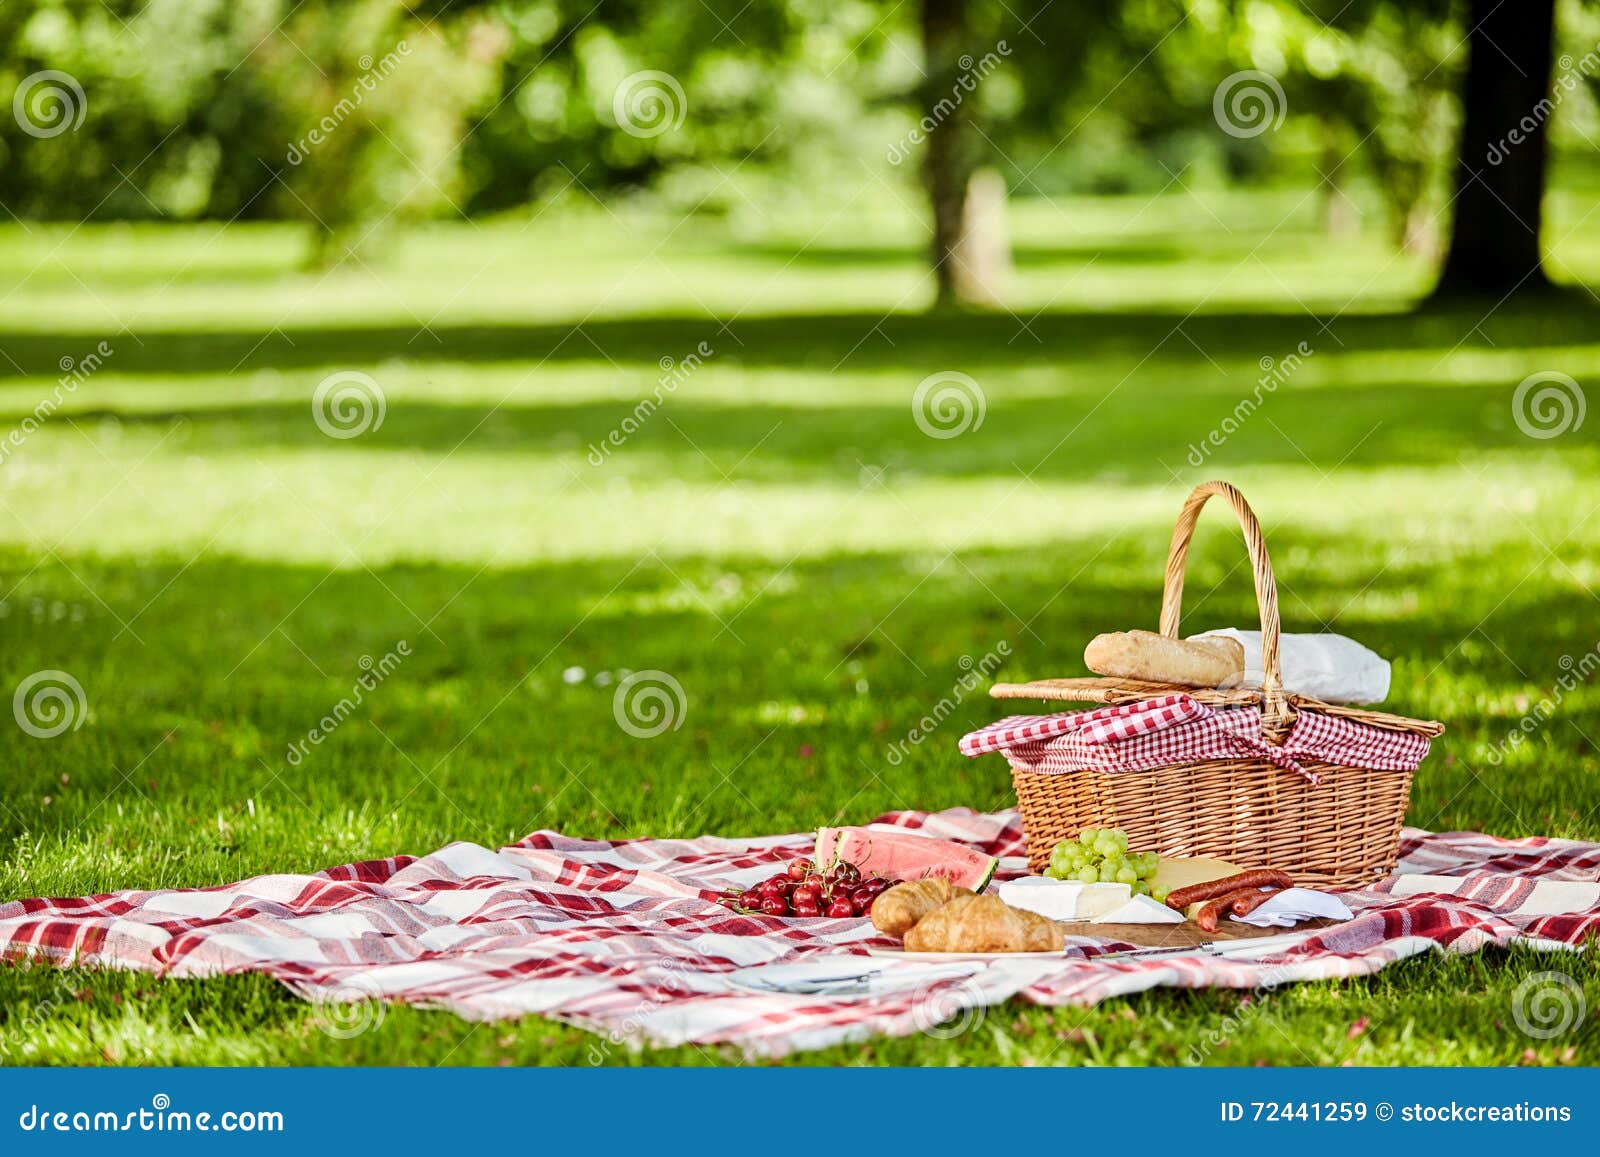 delicious picnic spread with fresh food